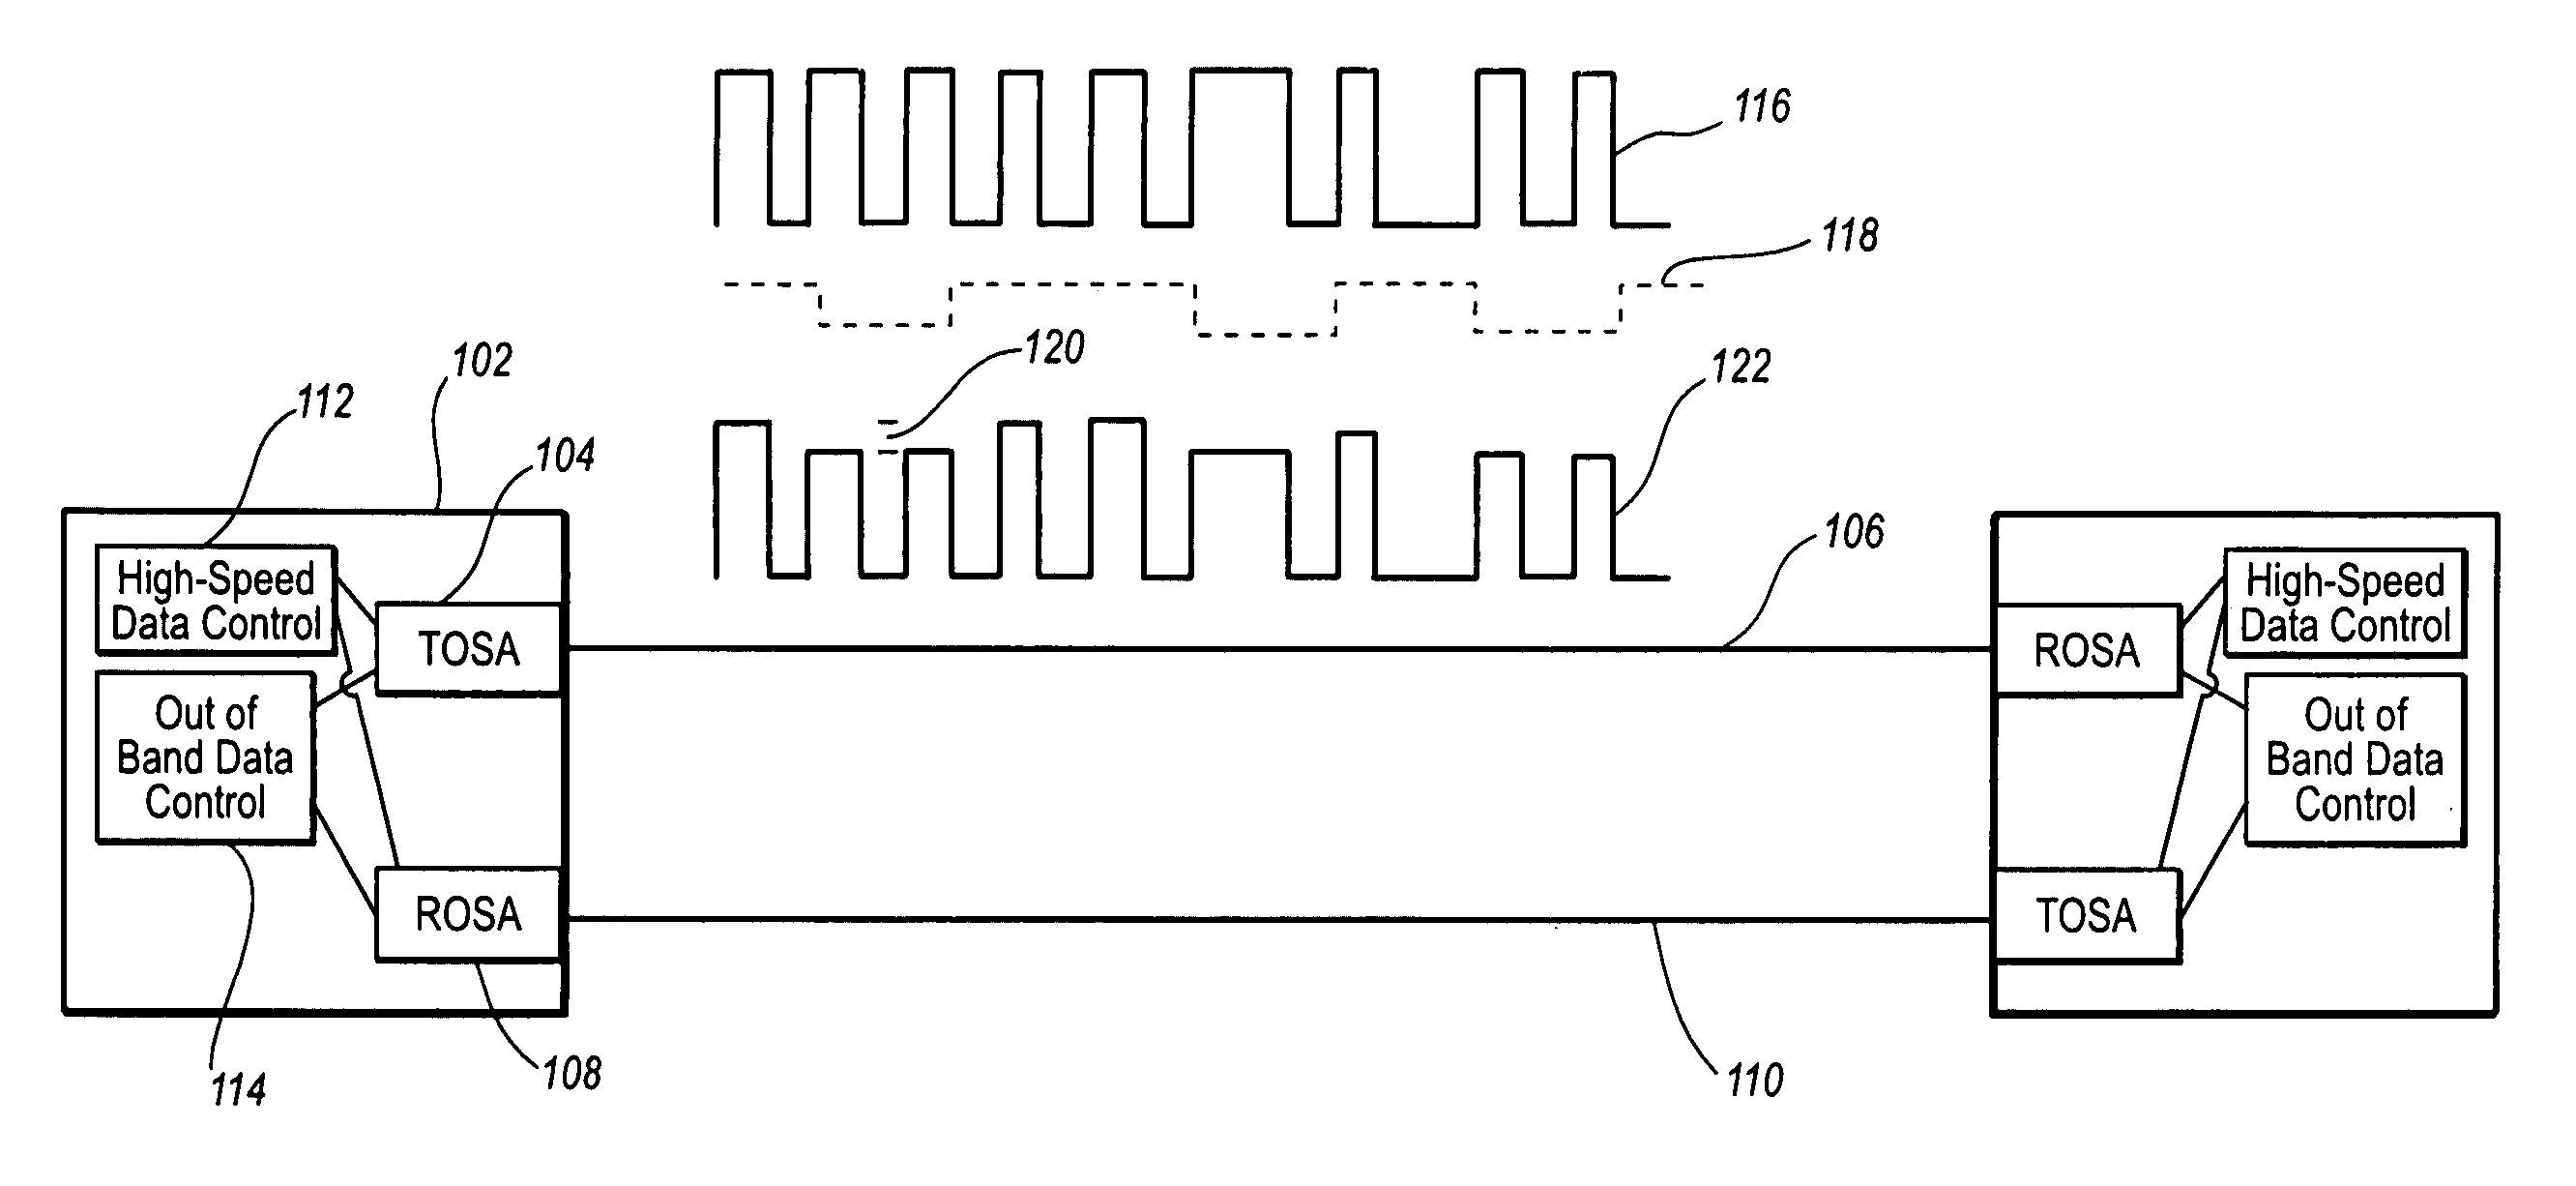 Network data transmission and diagnostic methods using out-of-band data